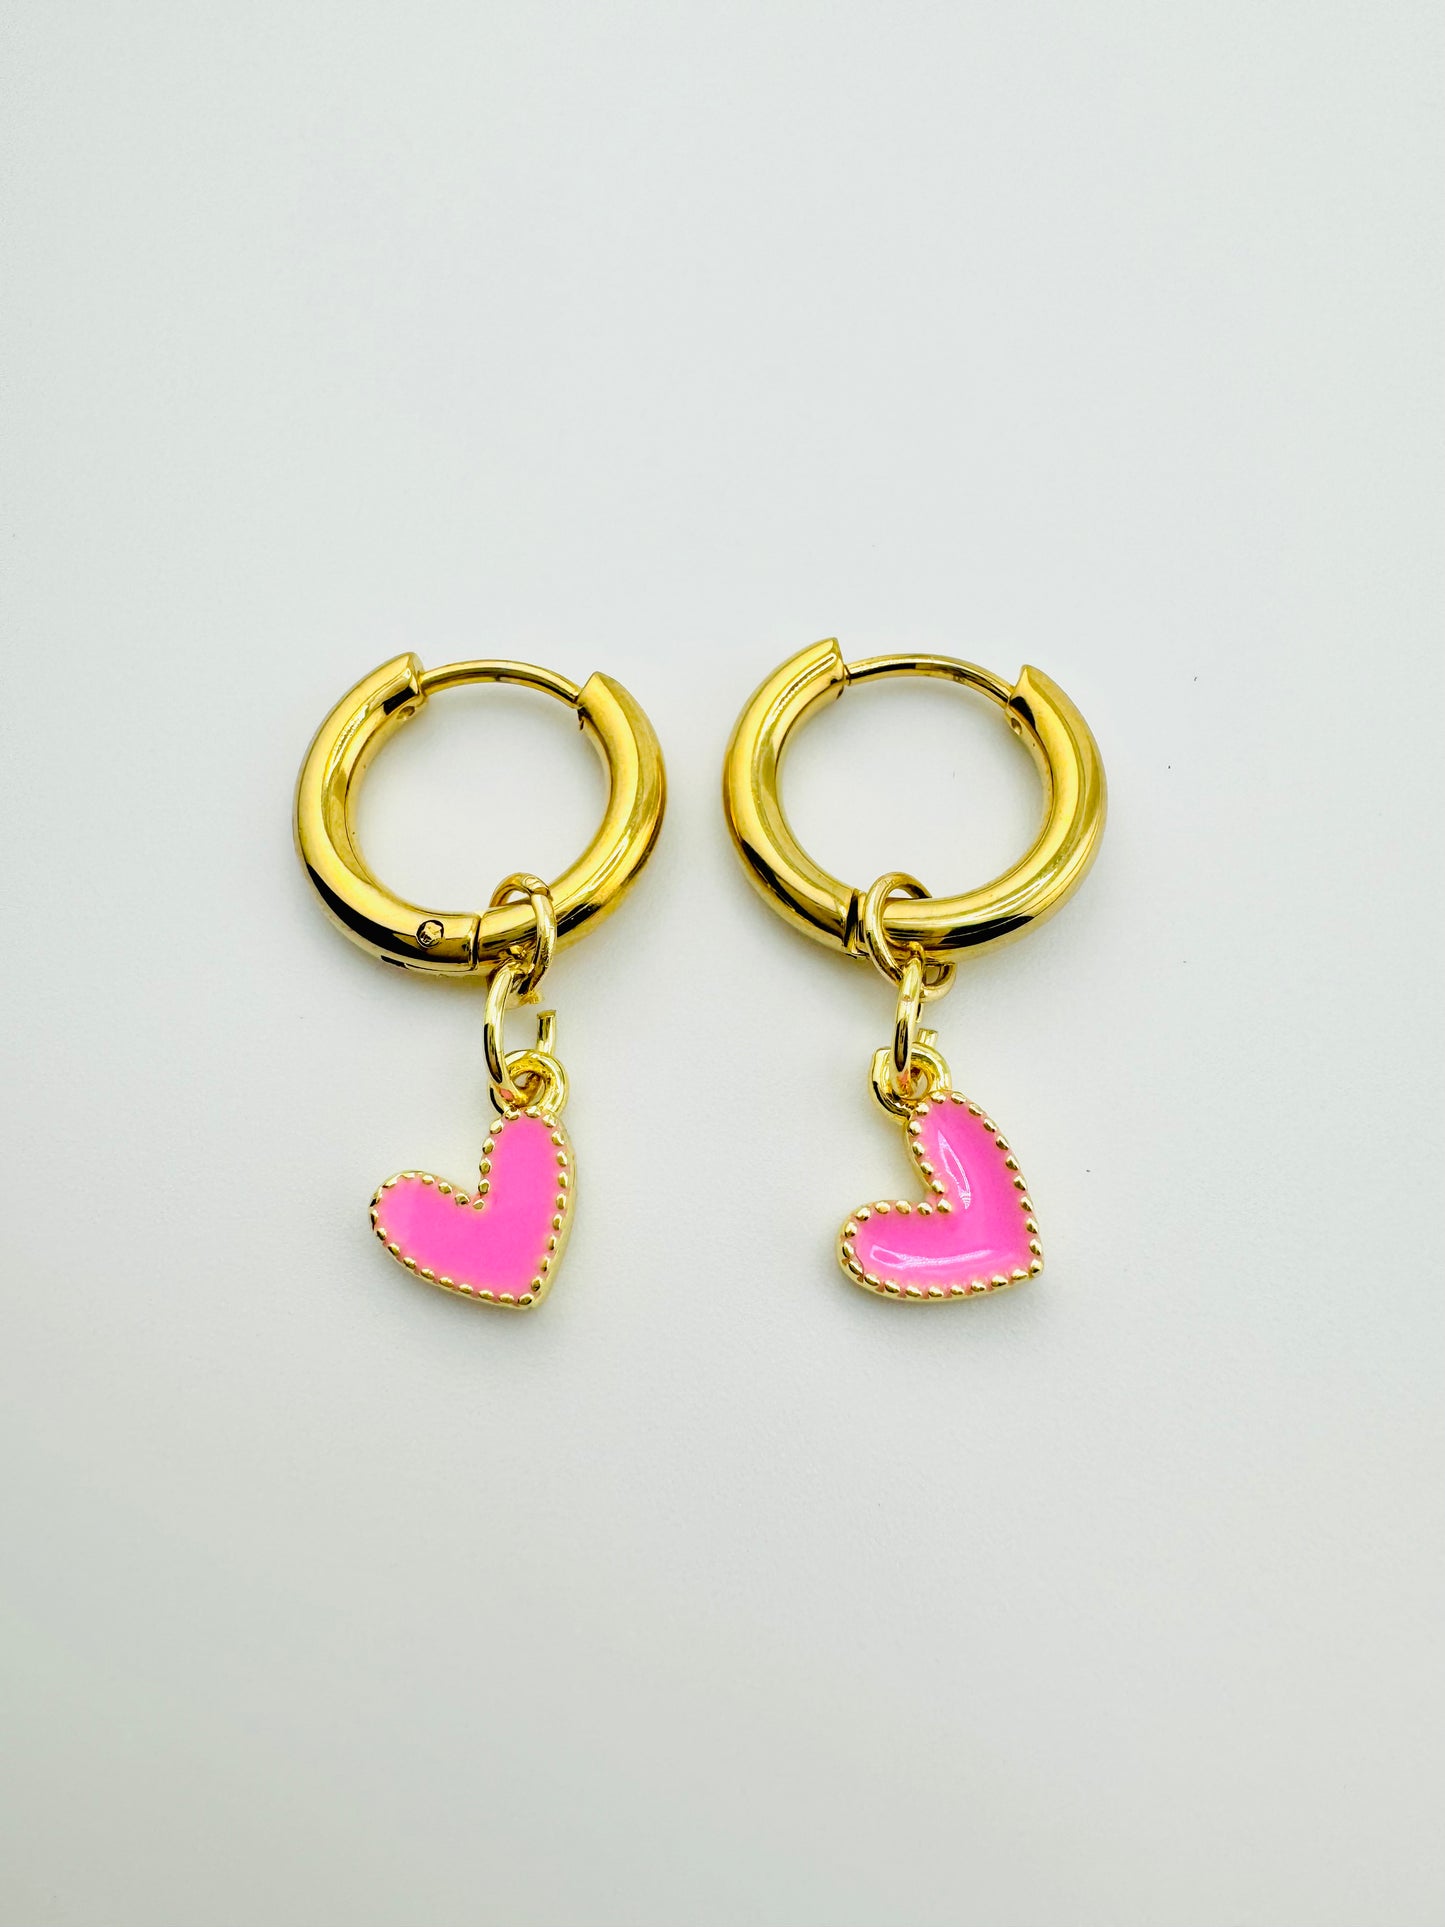 Adalynn stainless steel earring with a pink heart